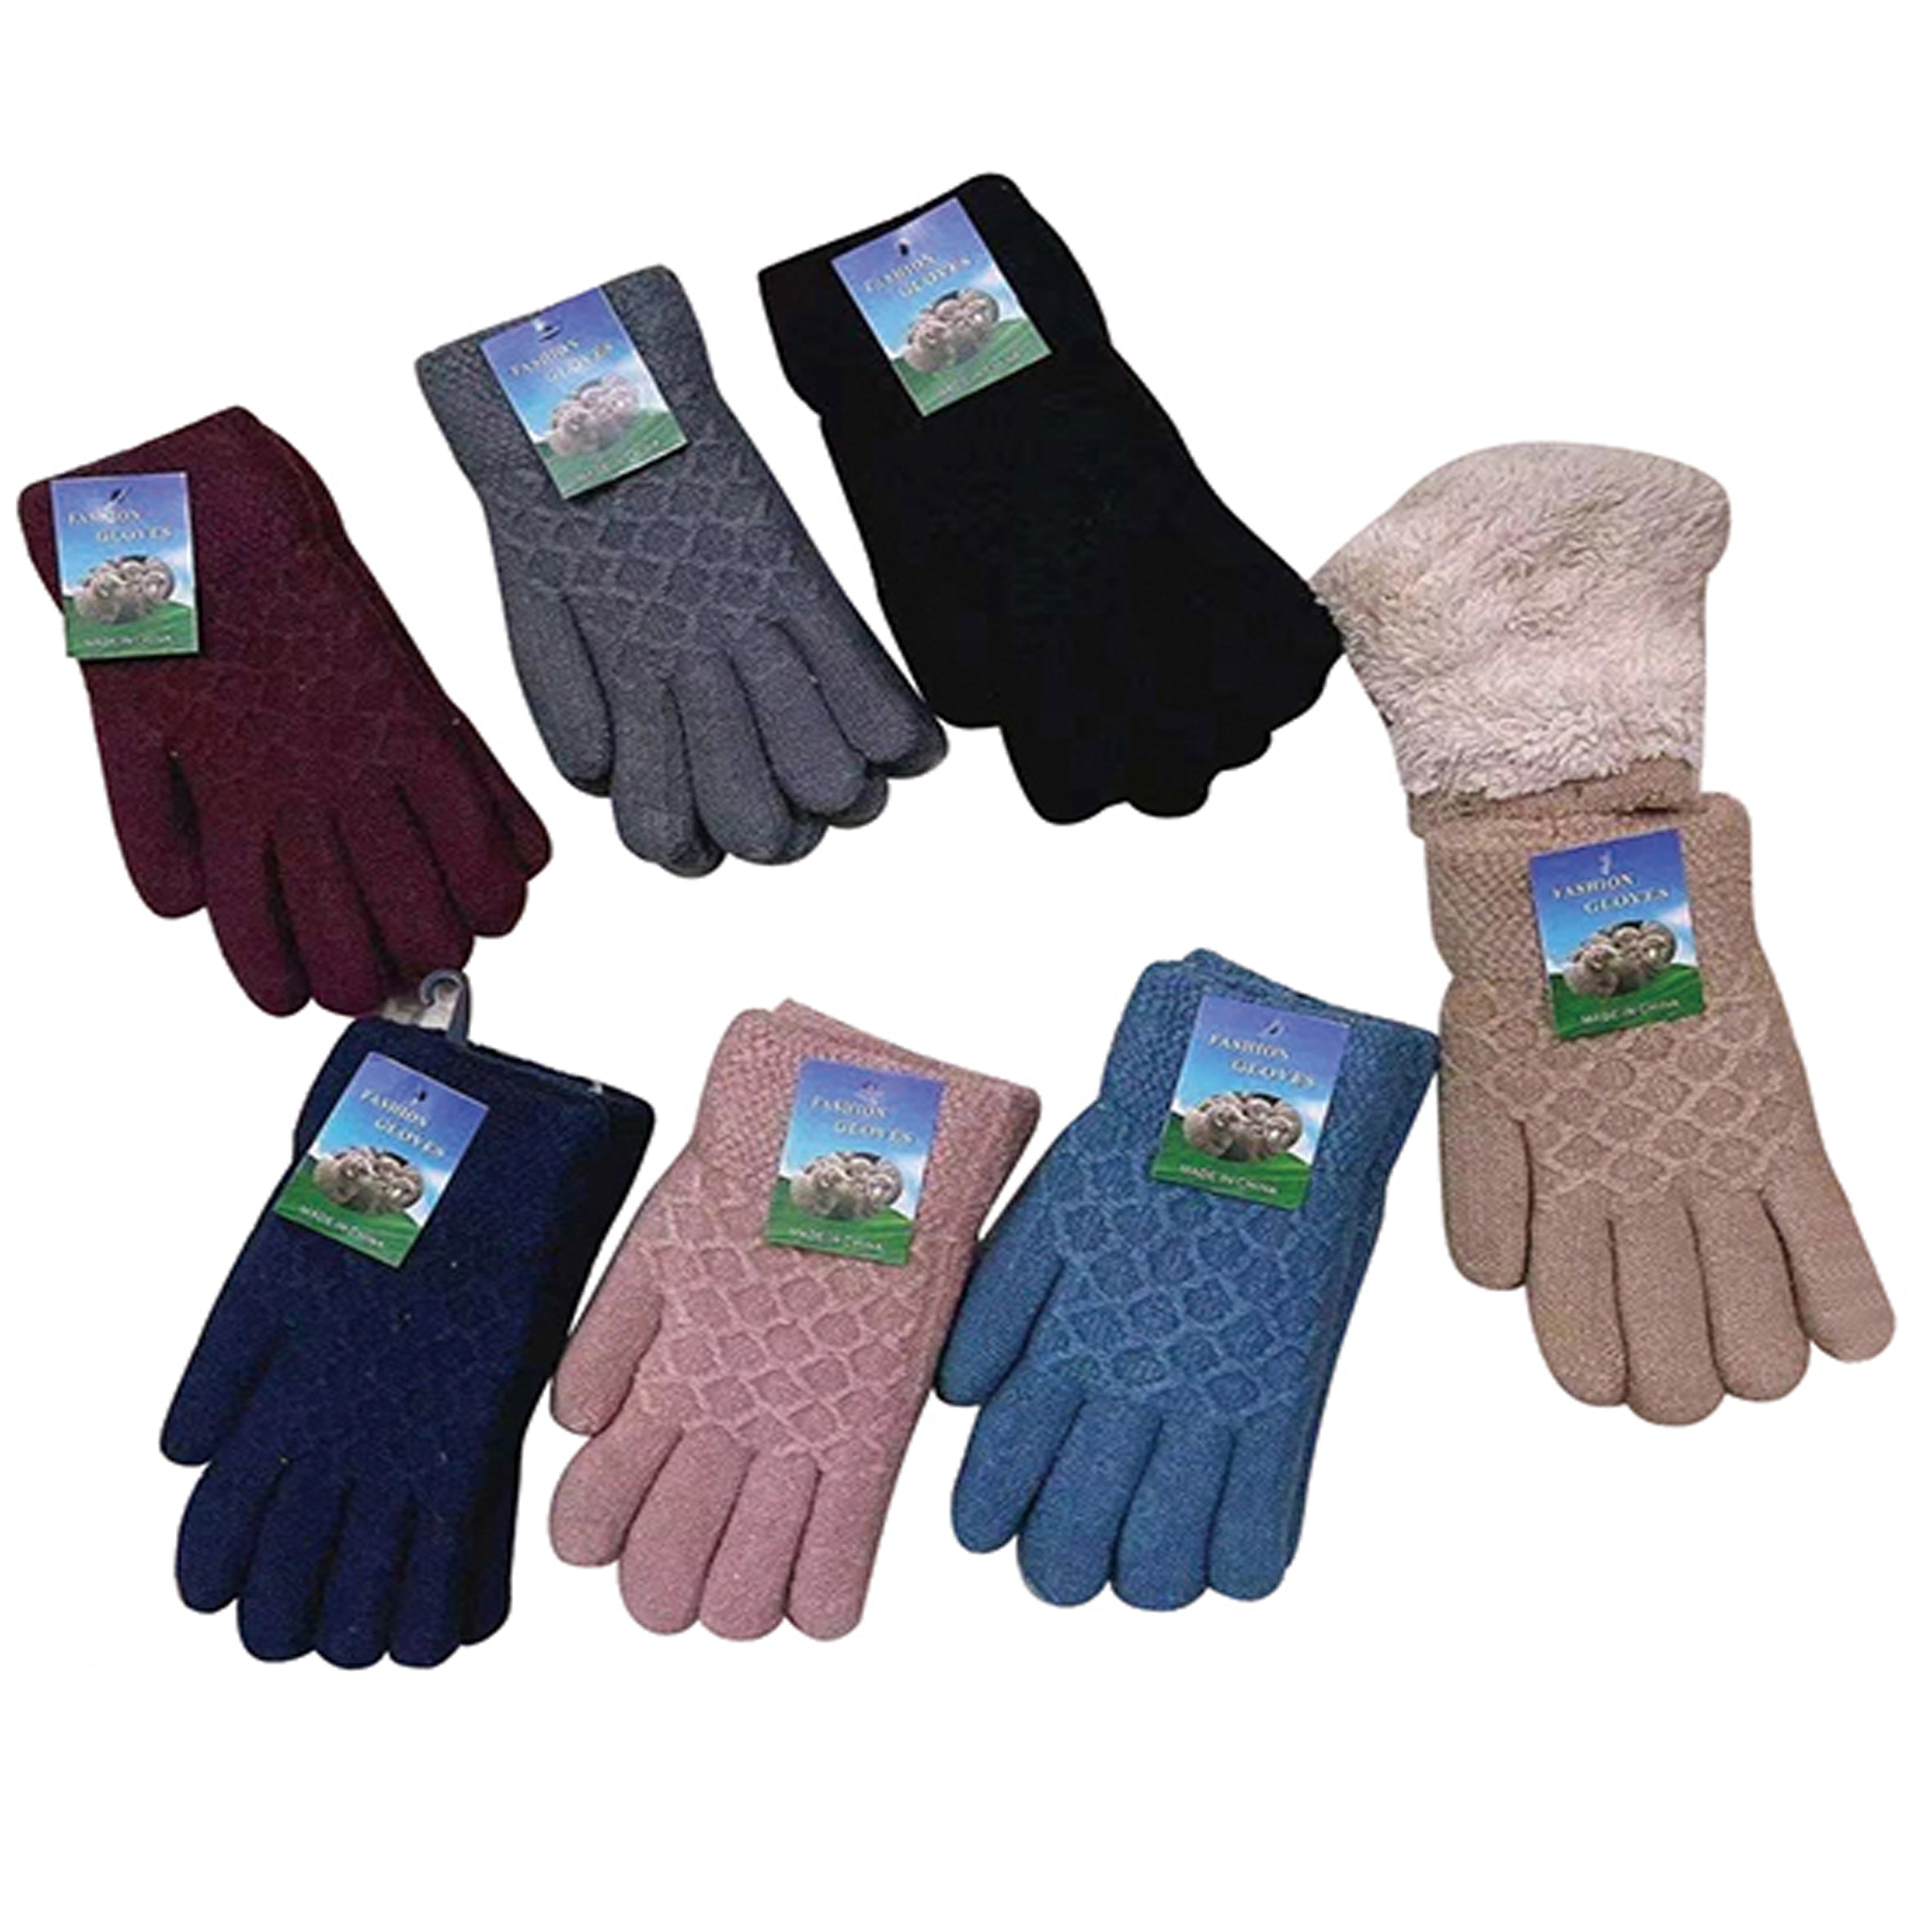 Wholesale CLOTHING Accessories Women's Glove Fur Inside Knitted Gloves NH280